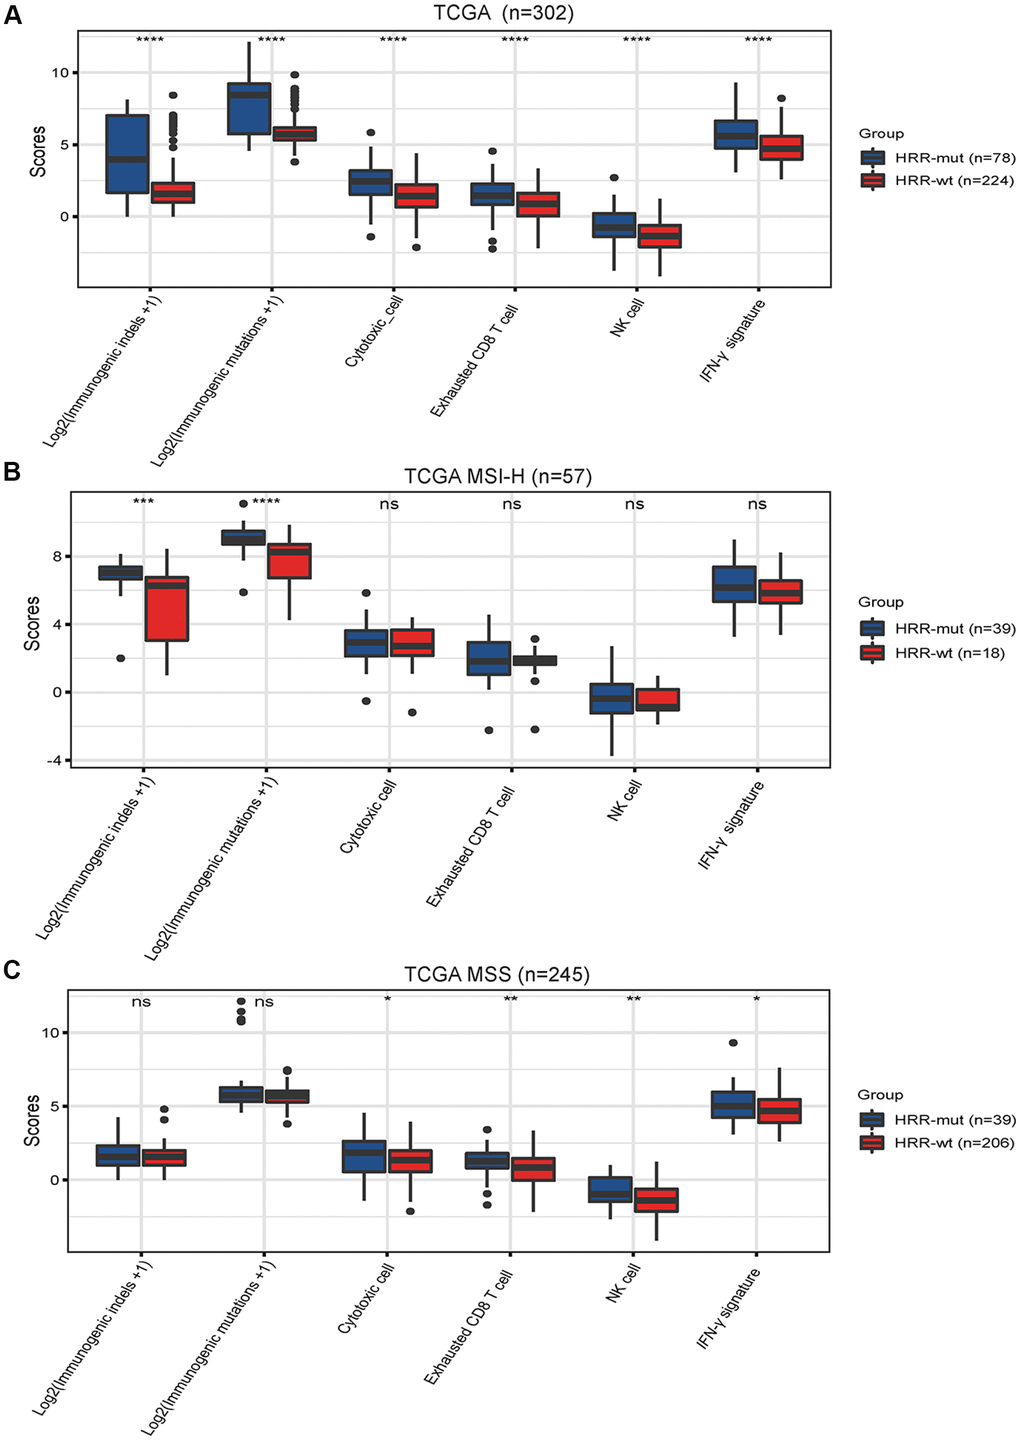 Mutations in HRR genes are associated with tumor immunogenicity and immune activity. Box plots showing the scores of immunogenic mutations, immunogenic indels, cytotoxic cells, exhausted CD8+ T cells, NK cells and IFN-γ signatures in the TCGA (A), TCGA MSI-H (B) AND TCGA MSS (C) cohorts. The scores for immunogenic mutations and indels are shown in log2-transformed format. P values were calculated with the Mann–Whitney U test; the box shows the upper and lower quartiles (* P P P P > 0.05).